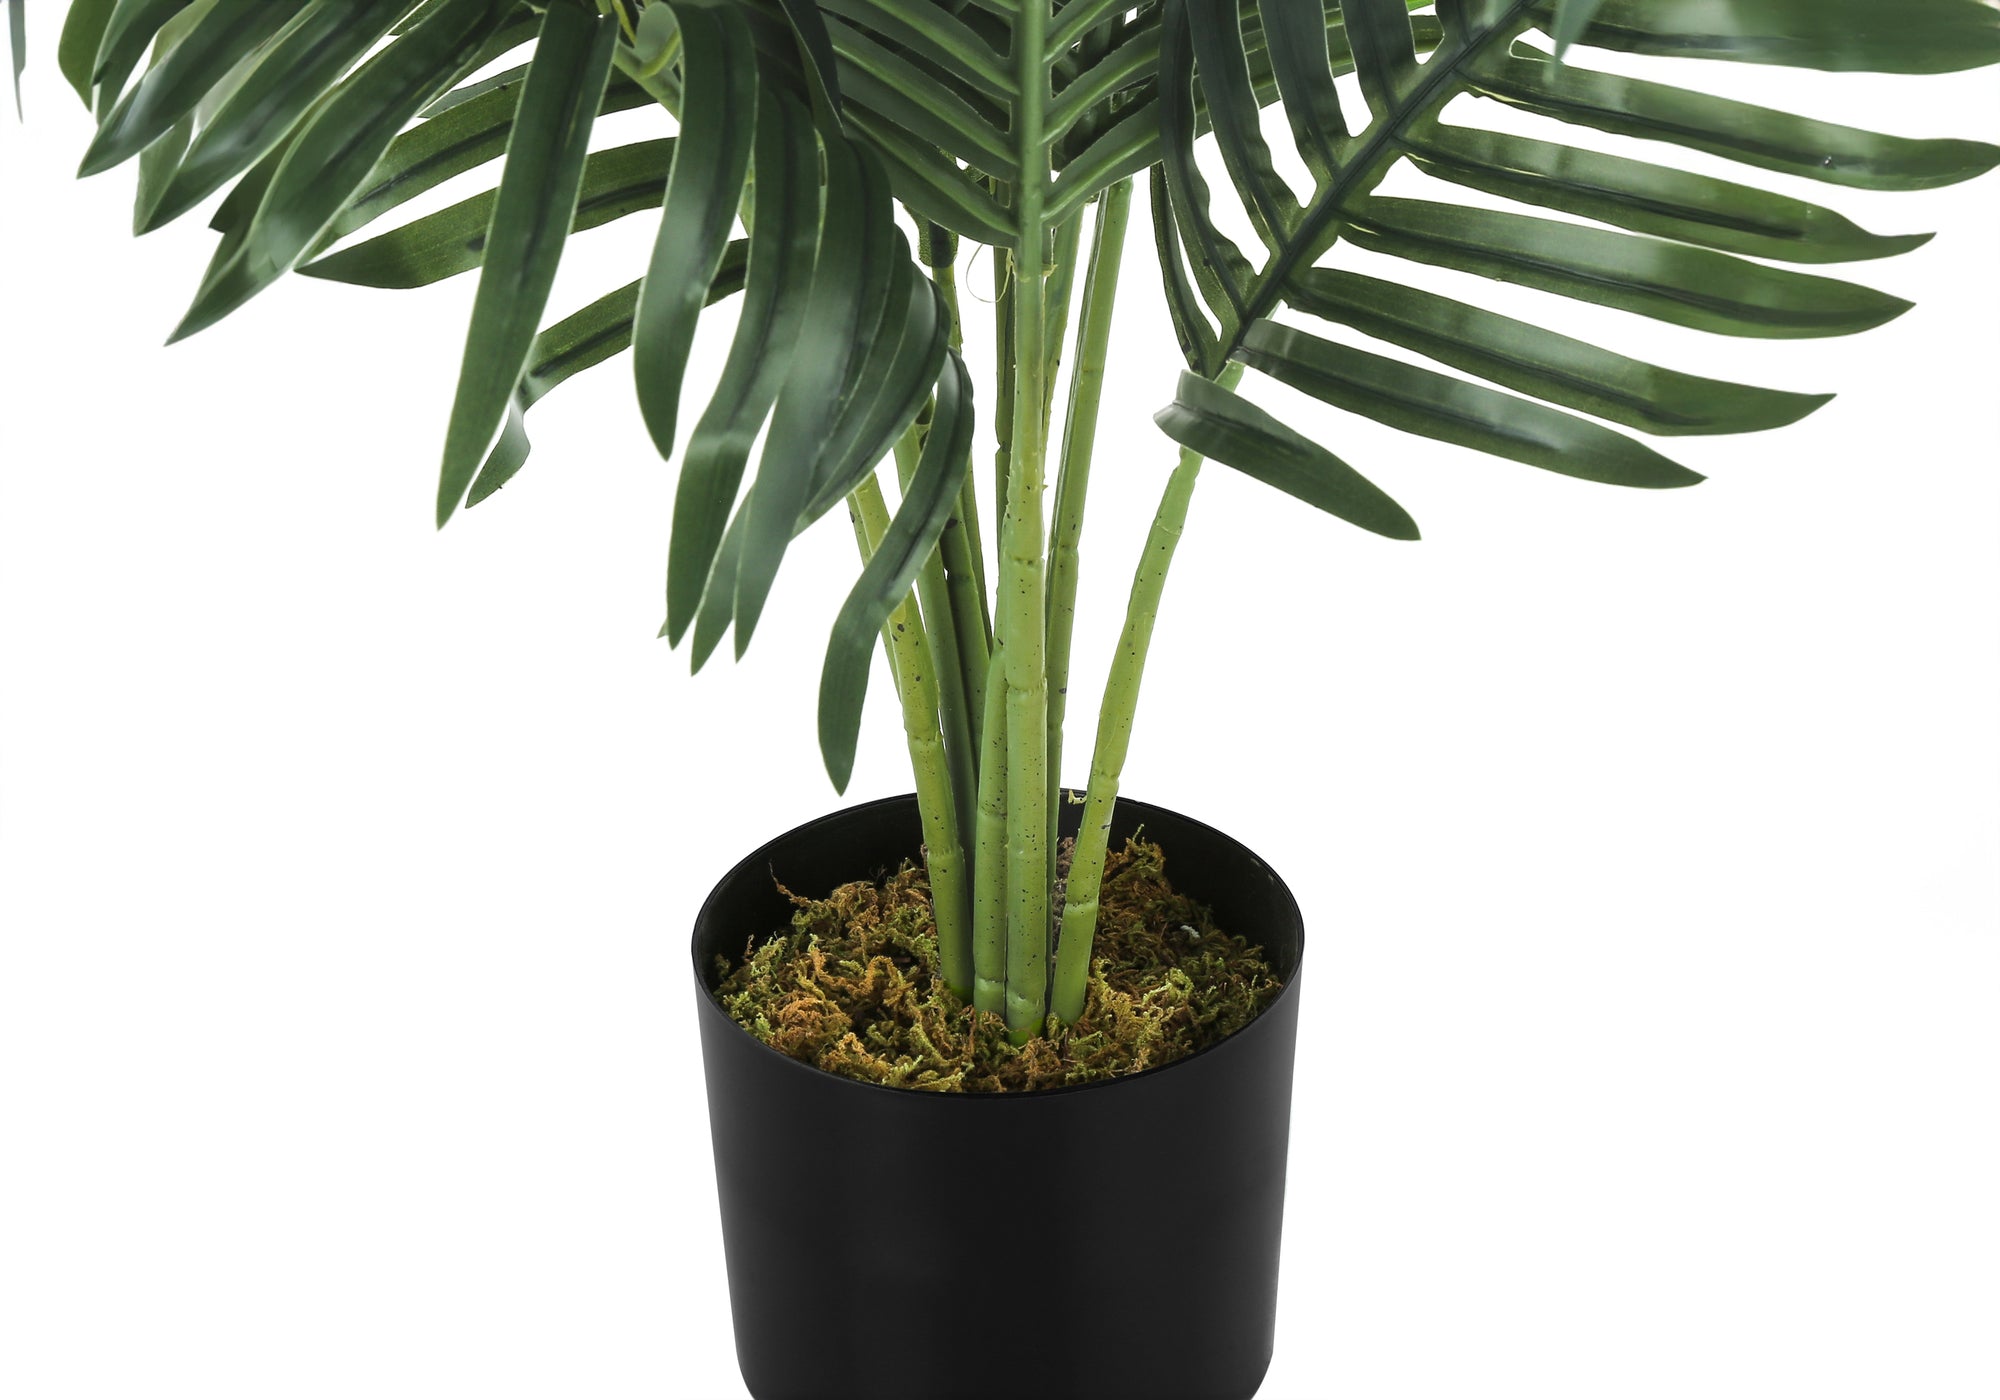 ARTIFICIAL PLANT - 34"H / INDOOR PALM TREE IN A 5" POT